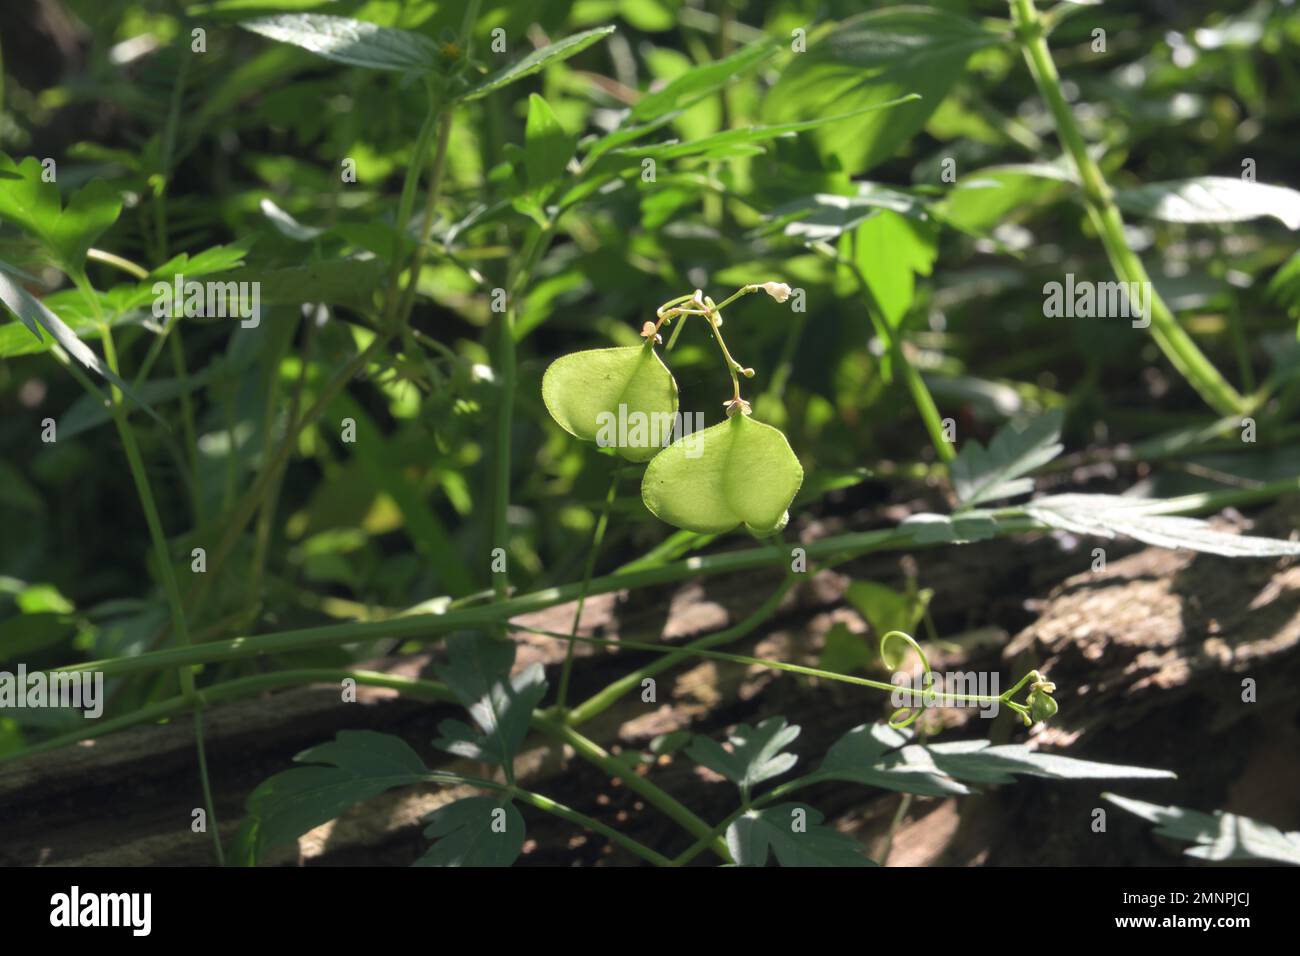 Side view of capsule fruits of a Lesser balloon vine (Cardiospermum Halicacabum) in the wild ground area Stock Photo